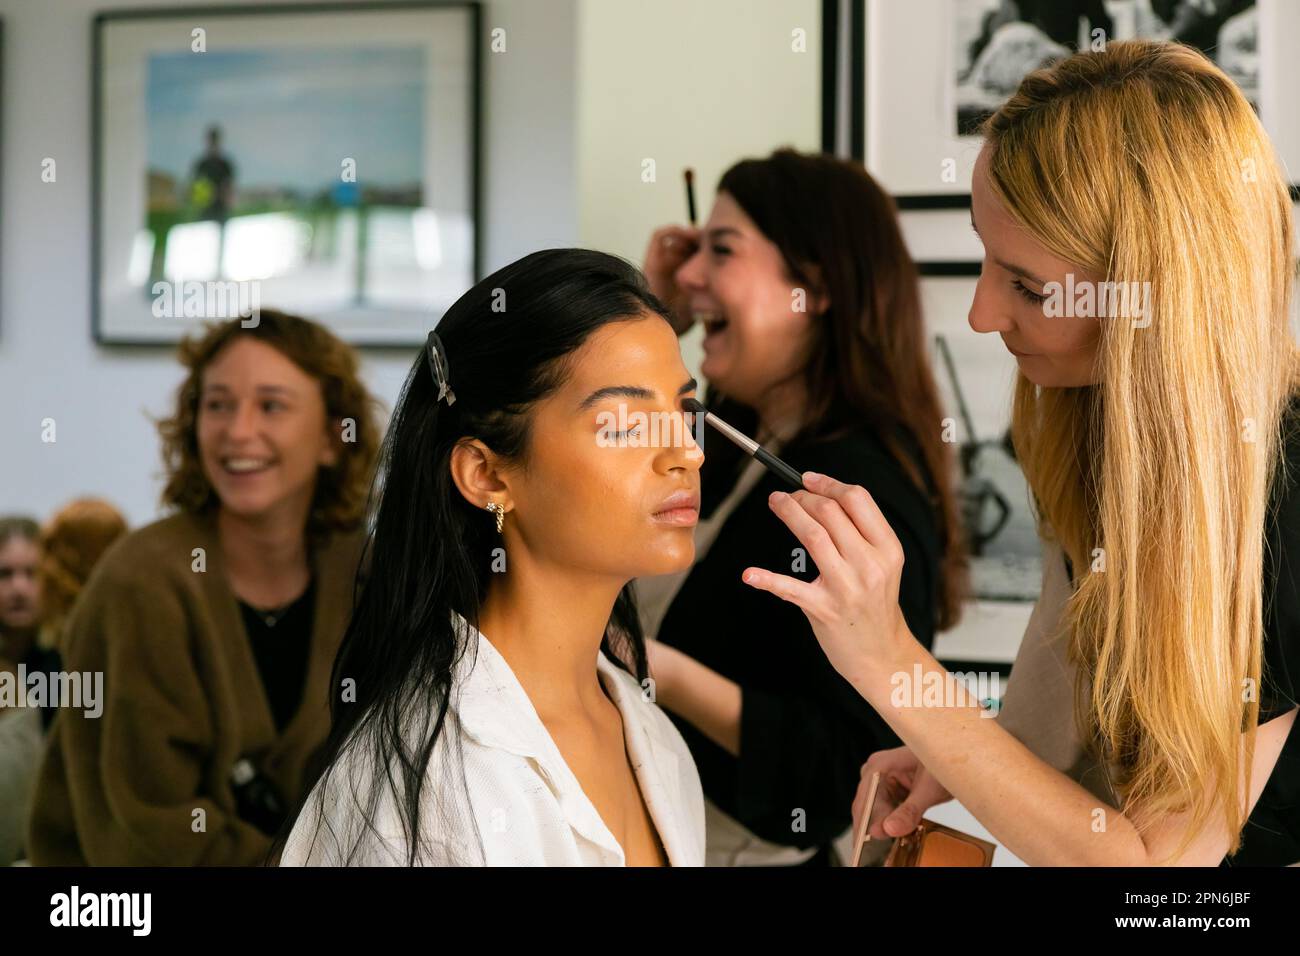 Cape Town, South Africa - November 15, 2022: Behind the Scenes Hair and Make-up on location Stock Photo